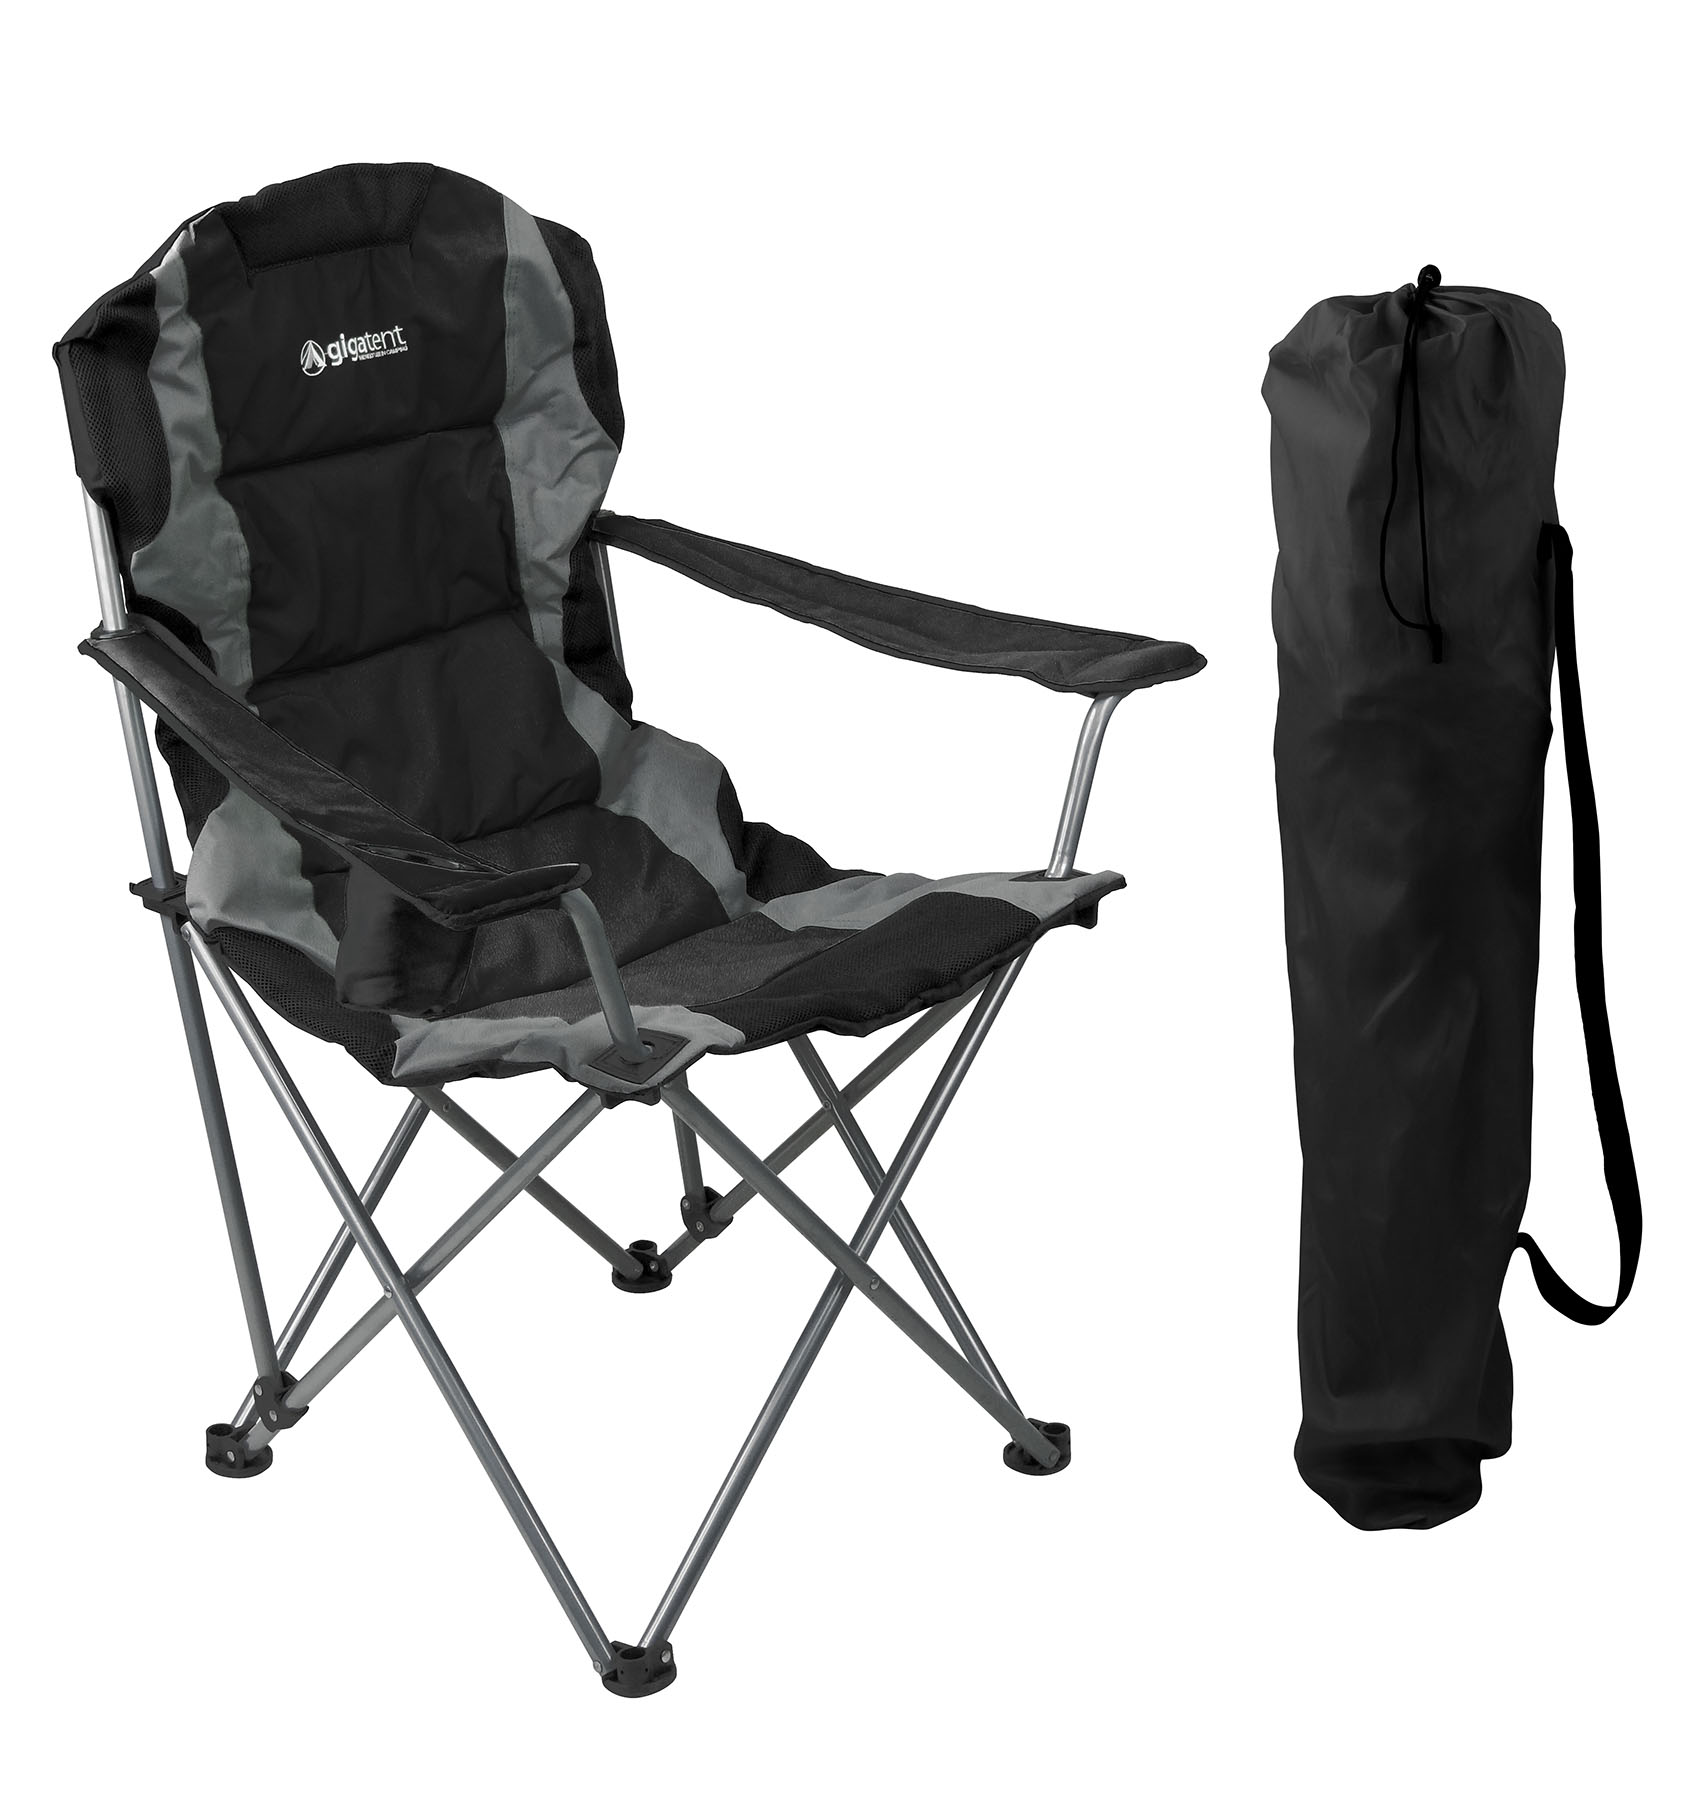 GigaTent Outdoor Camping Chair - Lightweight, Portable Design (Black) - image 3 of 8